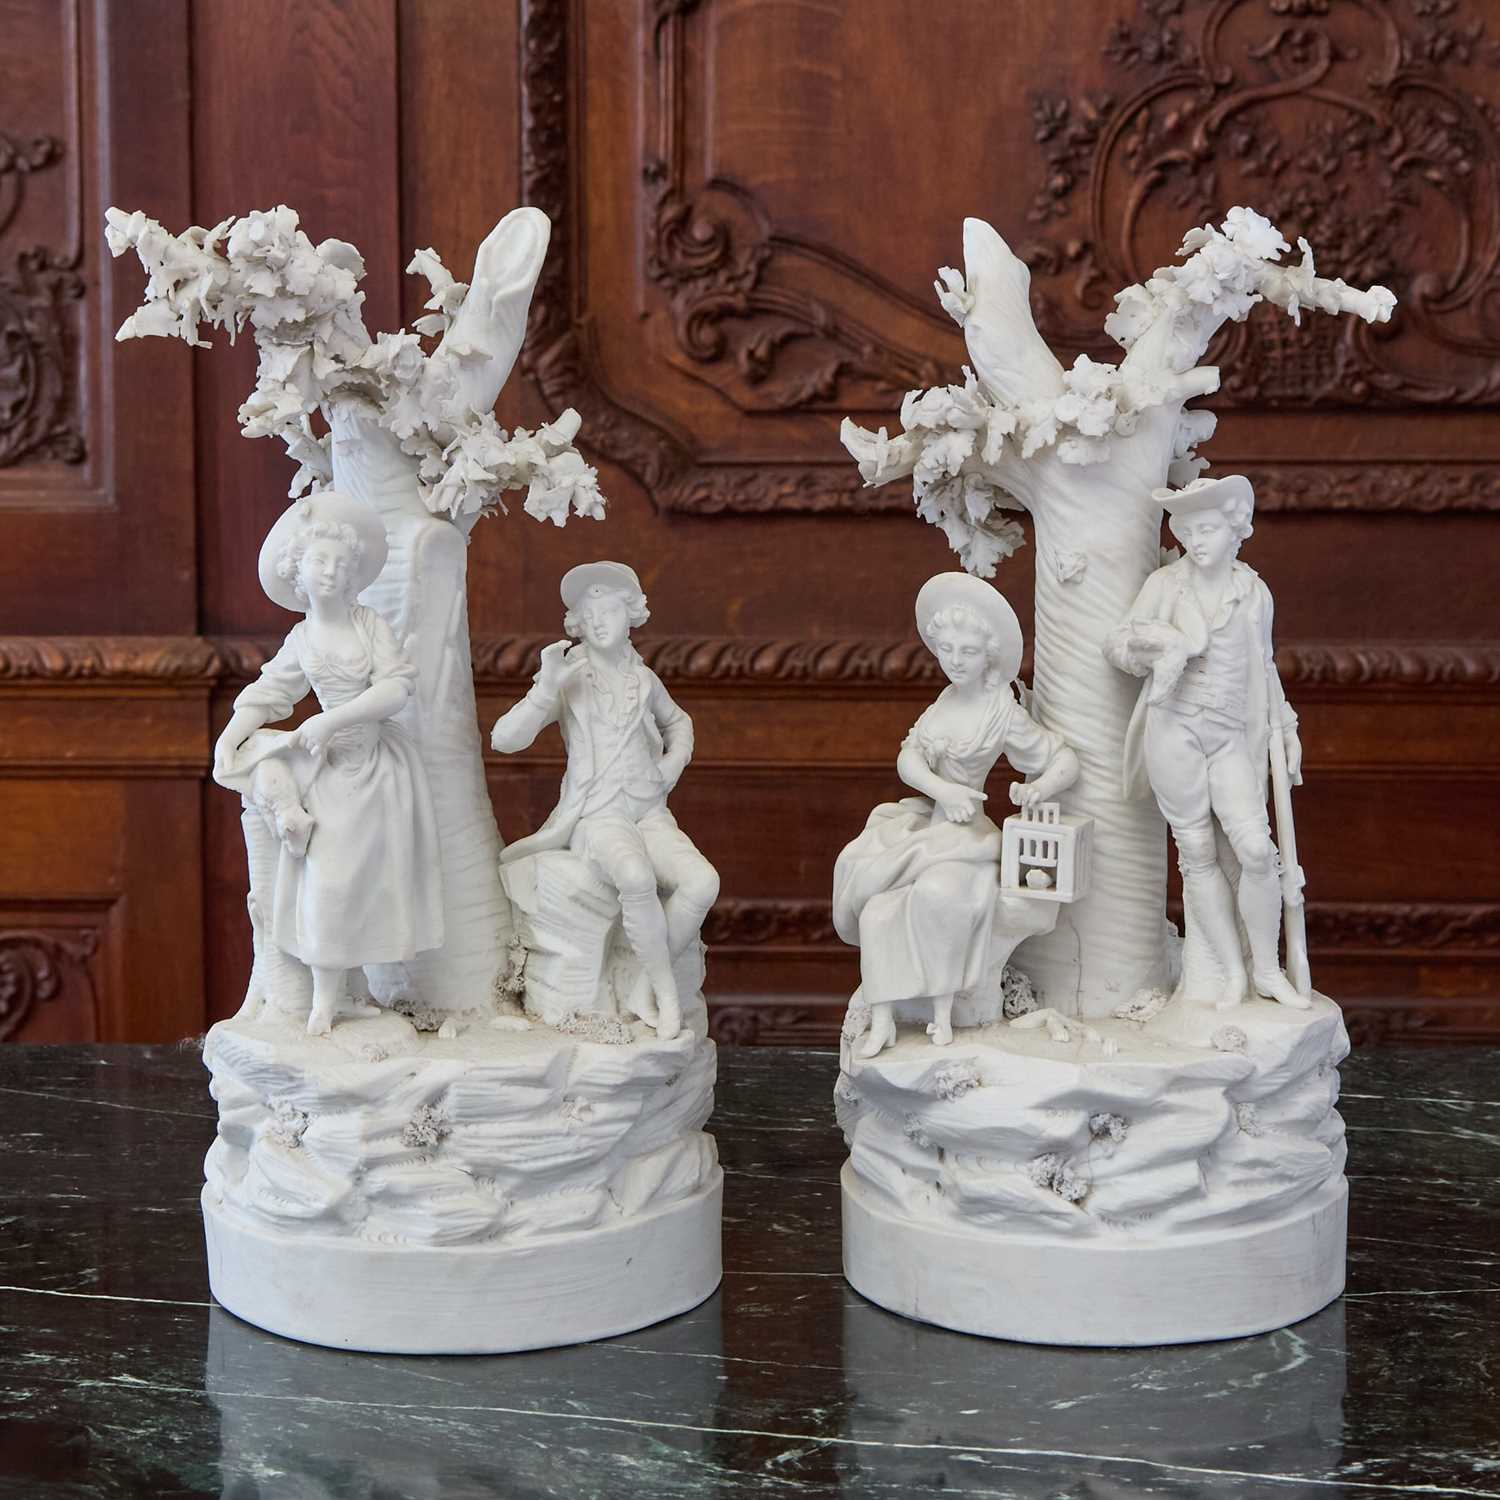 Lot 515 - PAIR OF PARIS (LOCRE) BISCUIT PORCELAIN FIGURE GROUPS EMBLEMATIC OF LIBERTY AND MATRIMONY